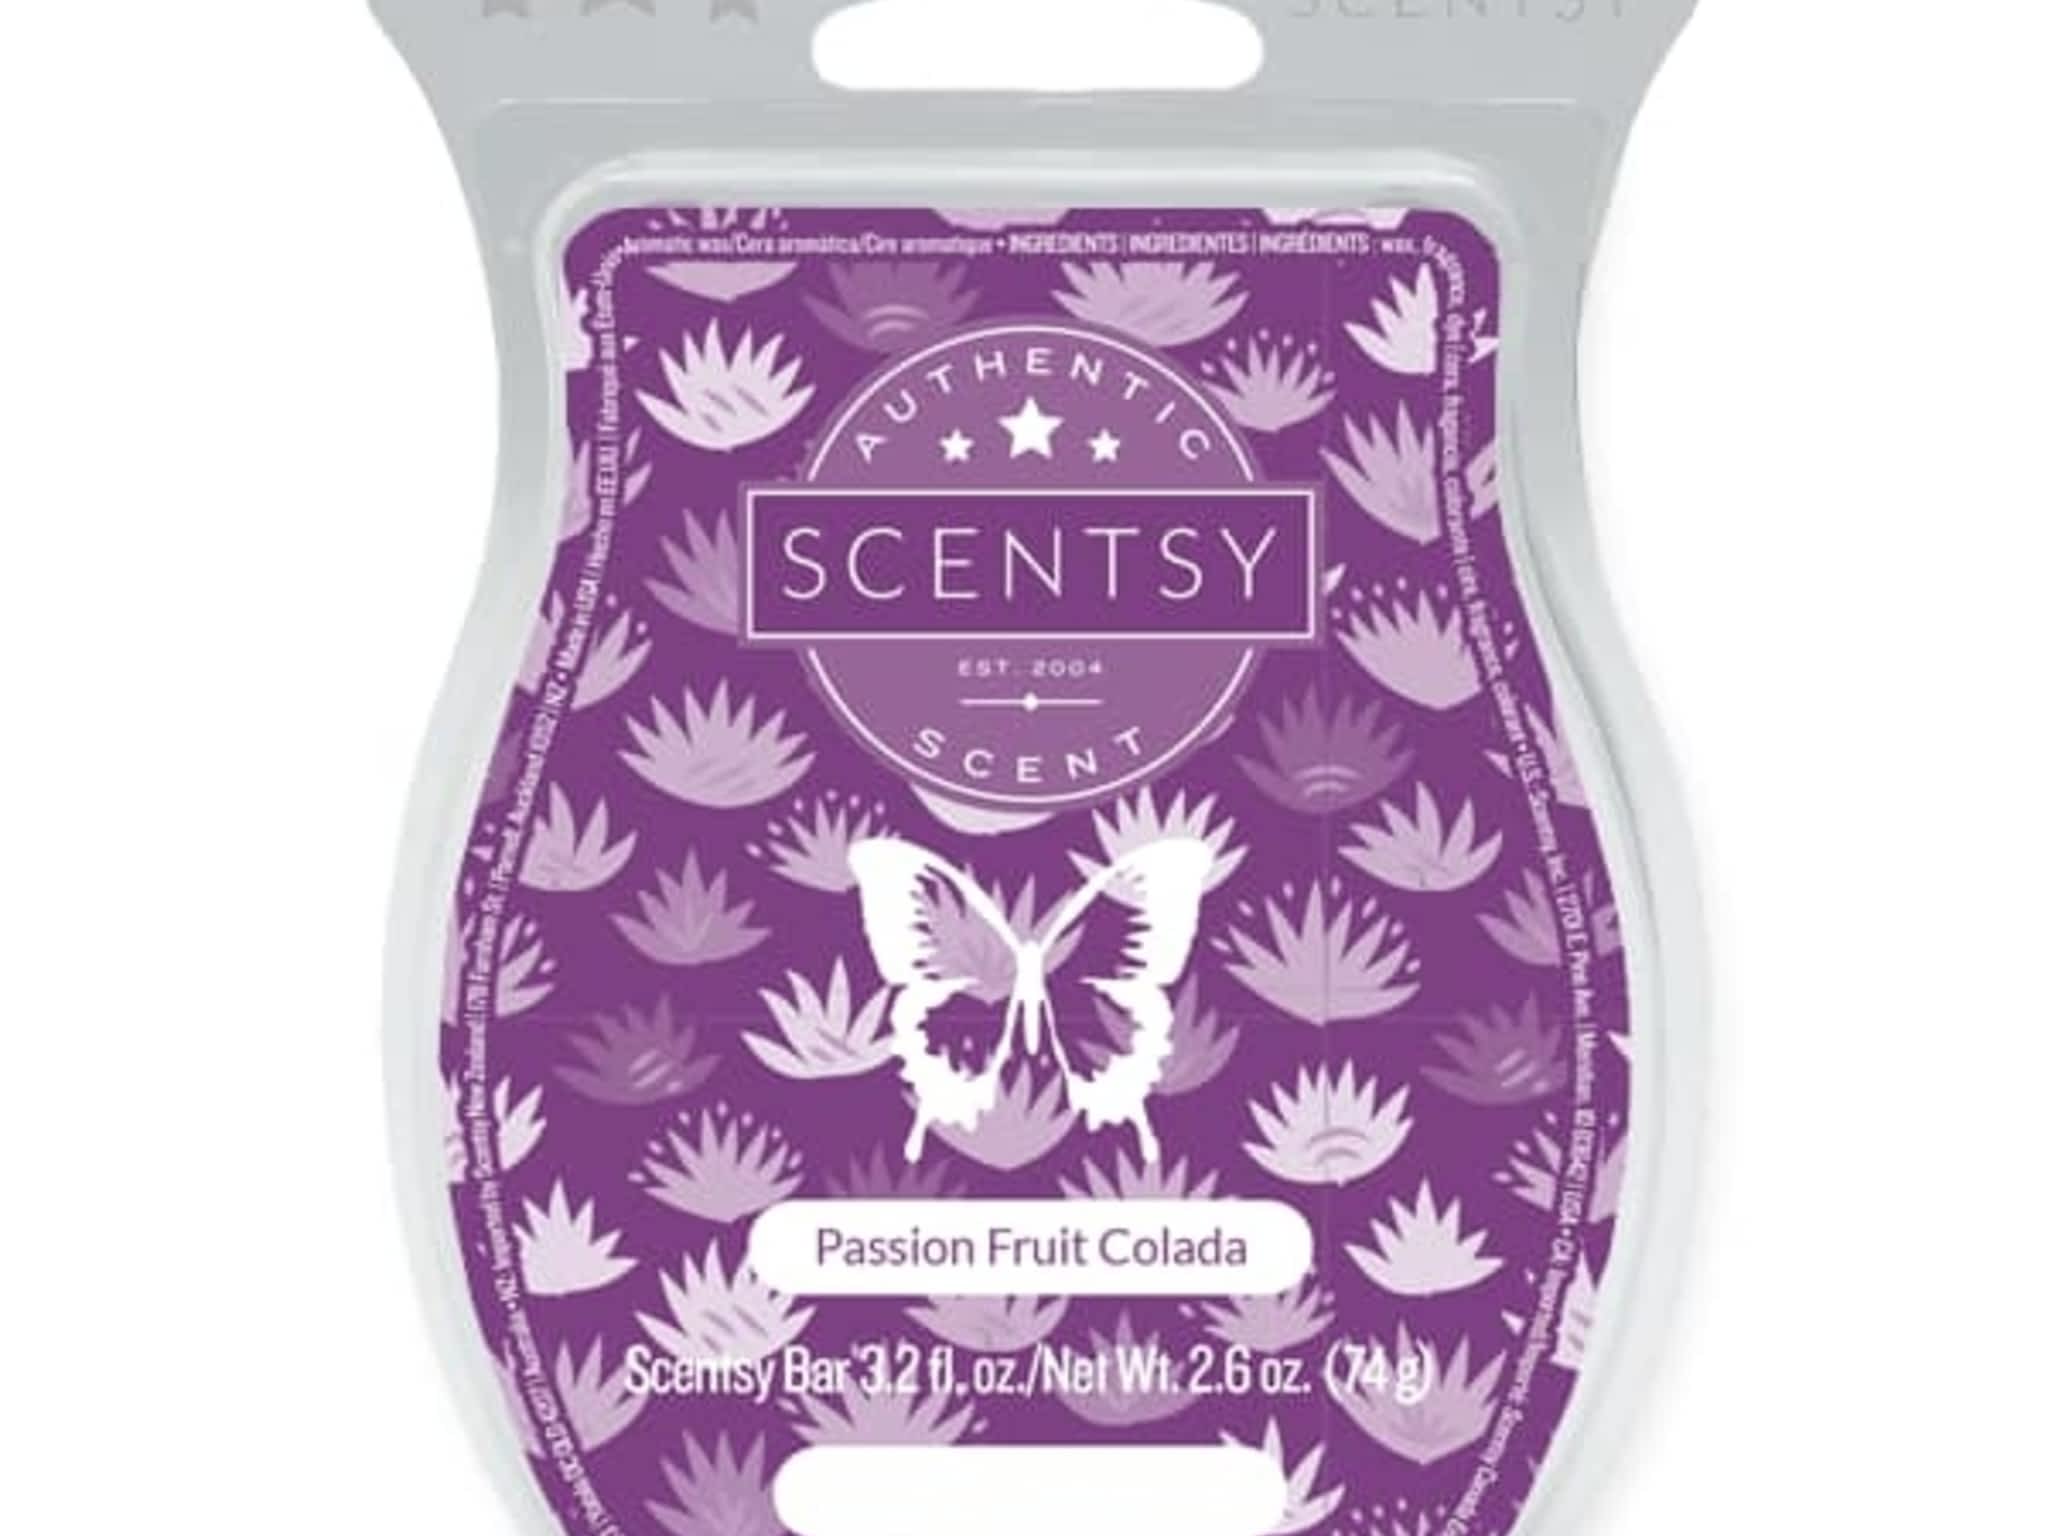 photo Tammy Scentsy Independent Consultant